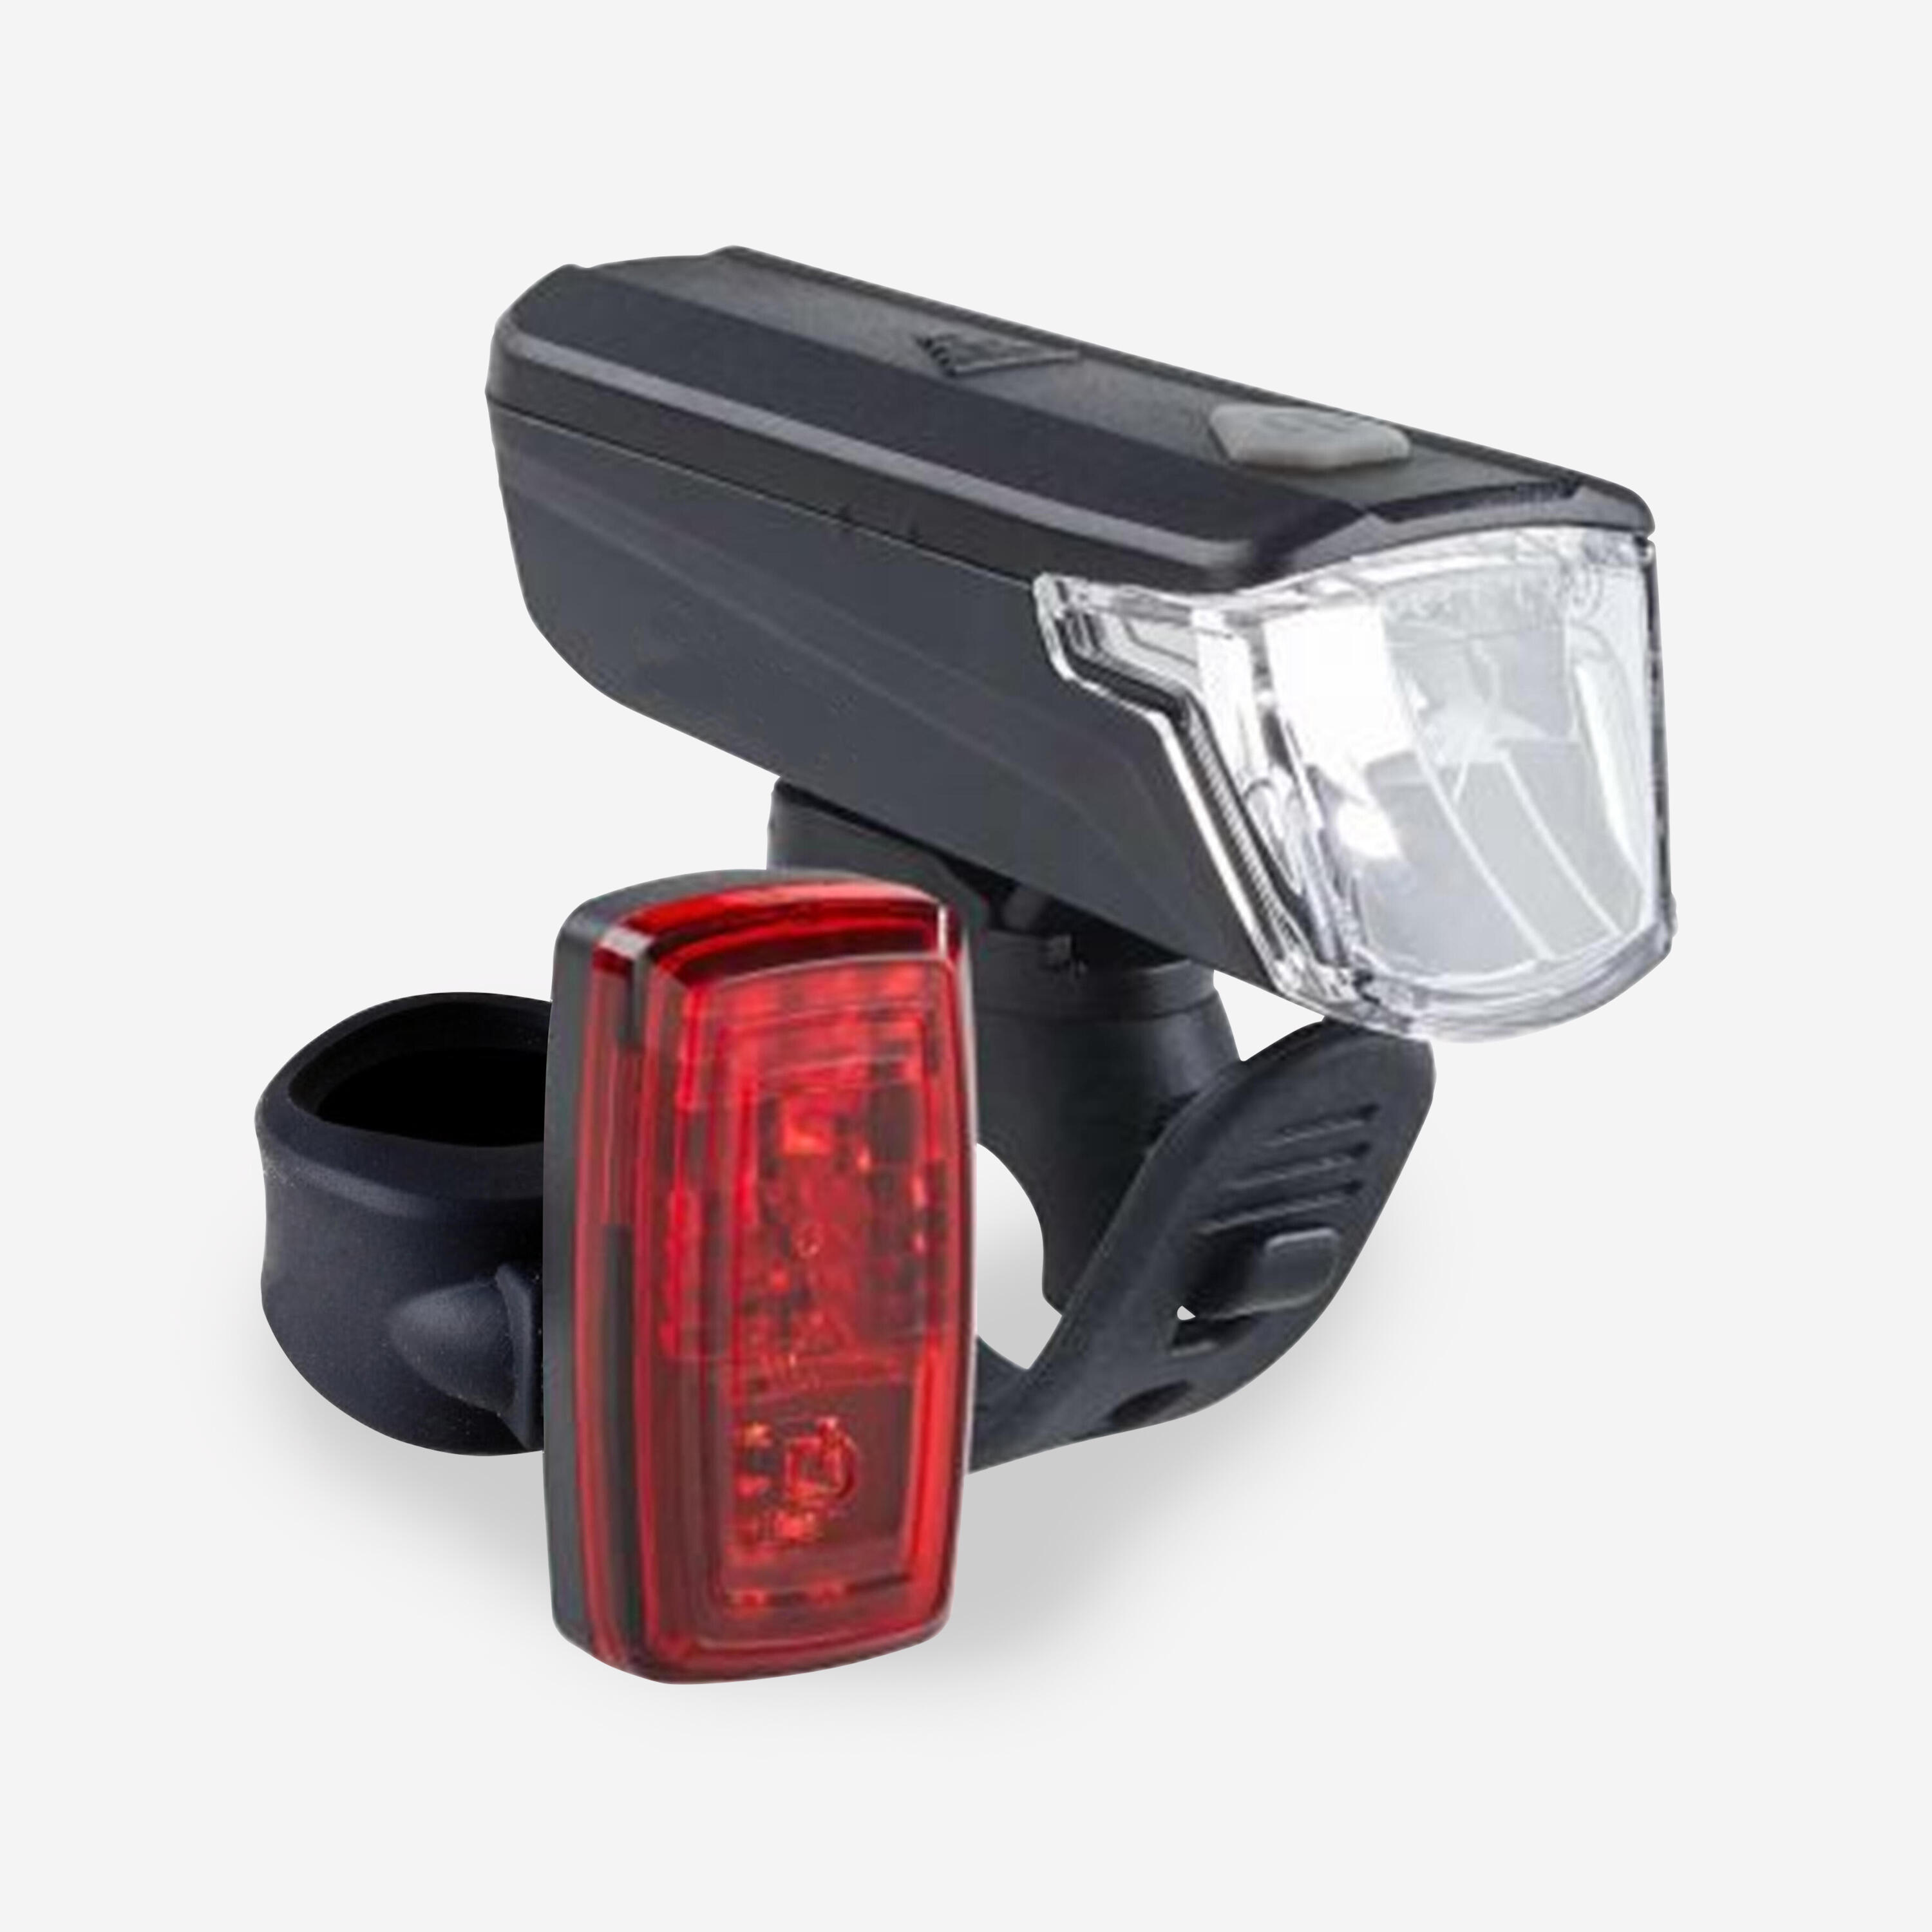 Waterproof front and rear battery-powered LED bike light set 1/9